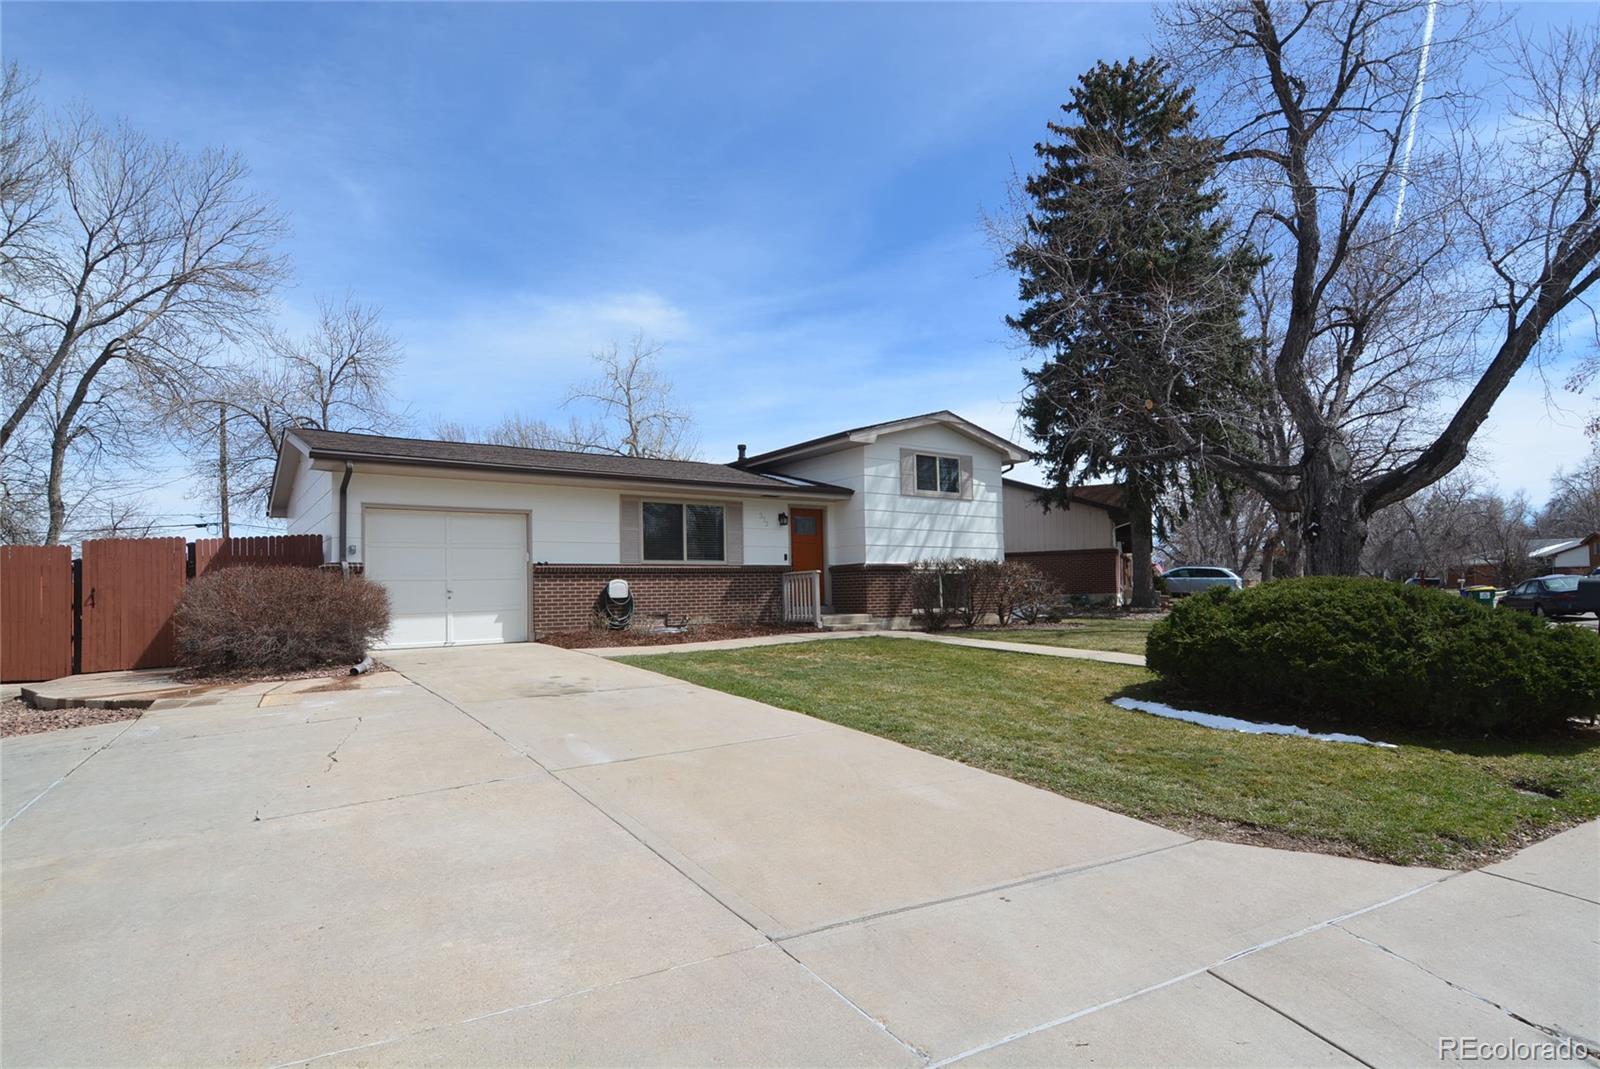 Report Image for 372 S Robb Way,Lakewood, Colorado